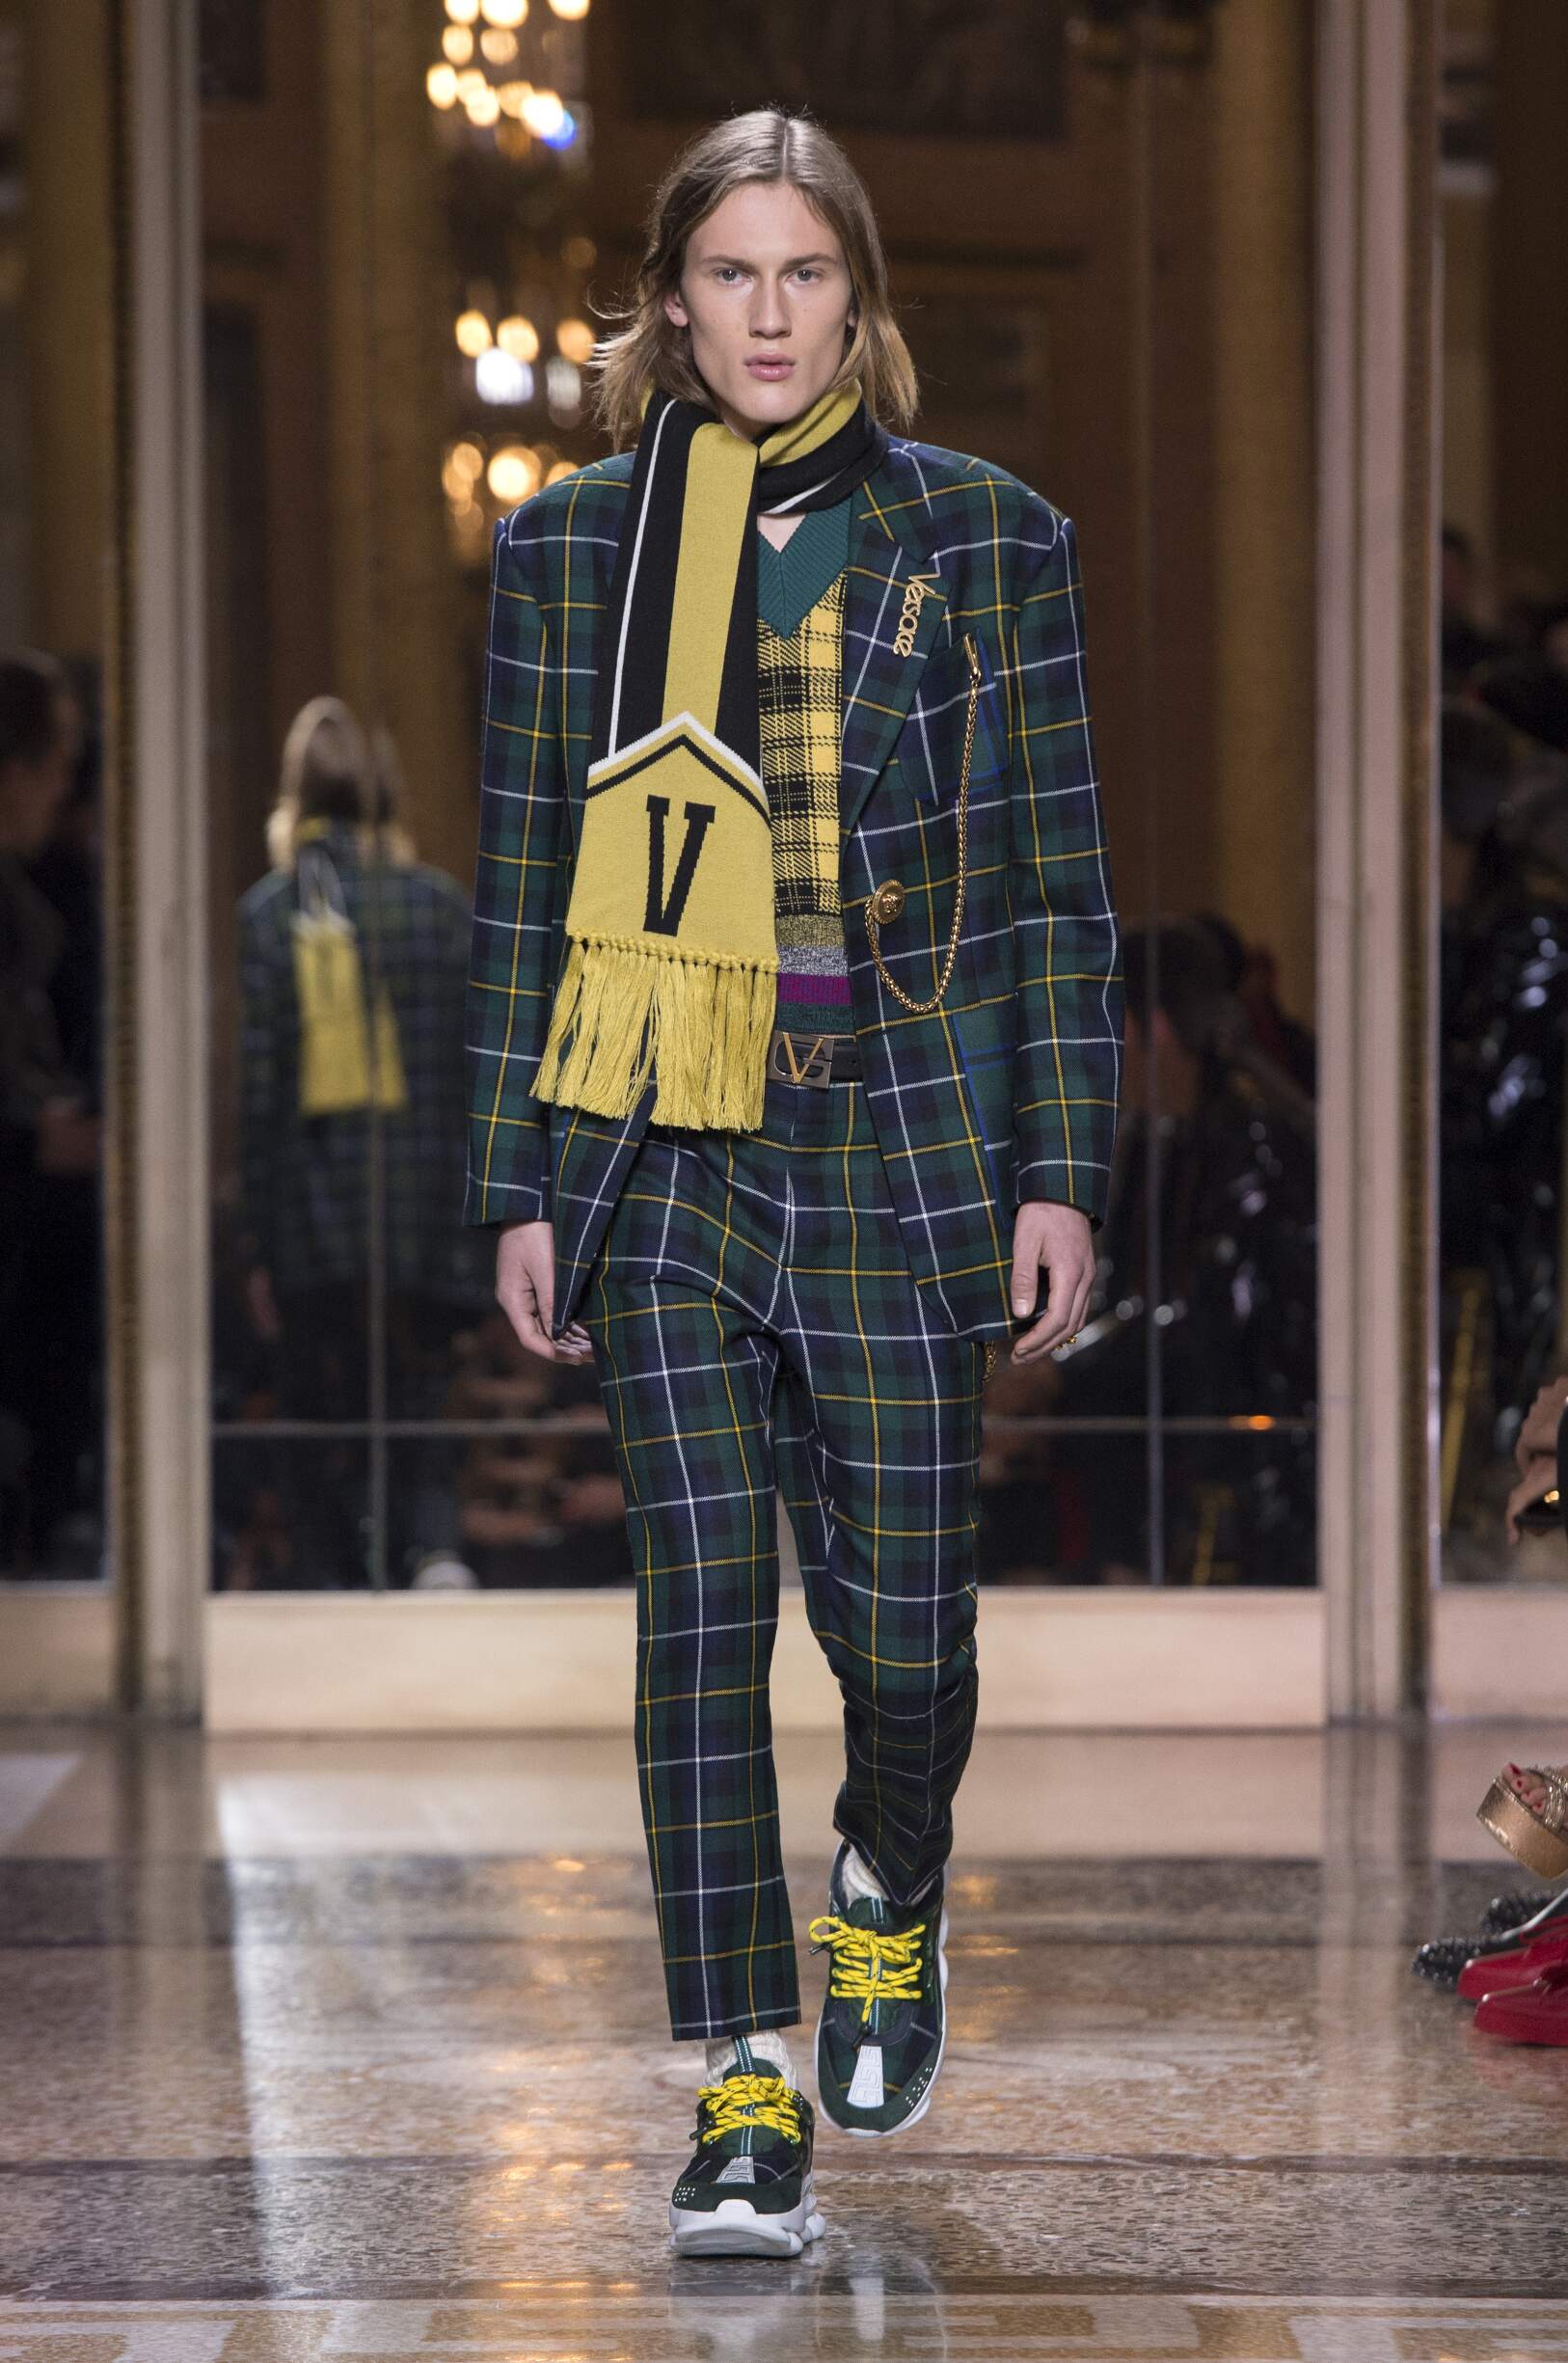 VERSACE FALL WINTER 2018 MEN’S COLLECTION | The Skinny Beep